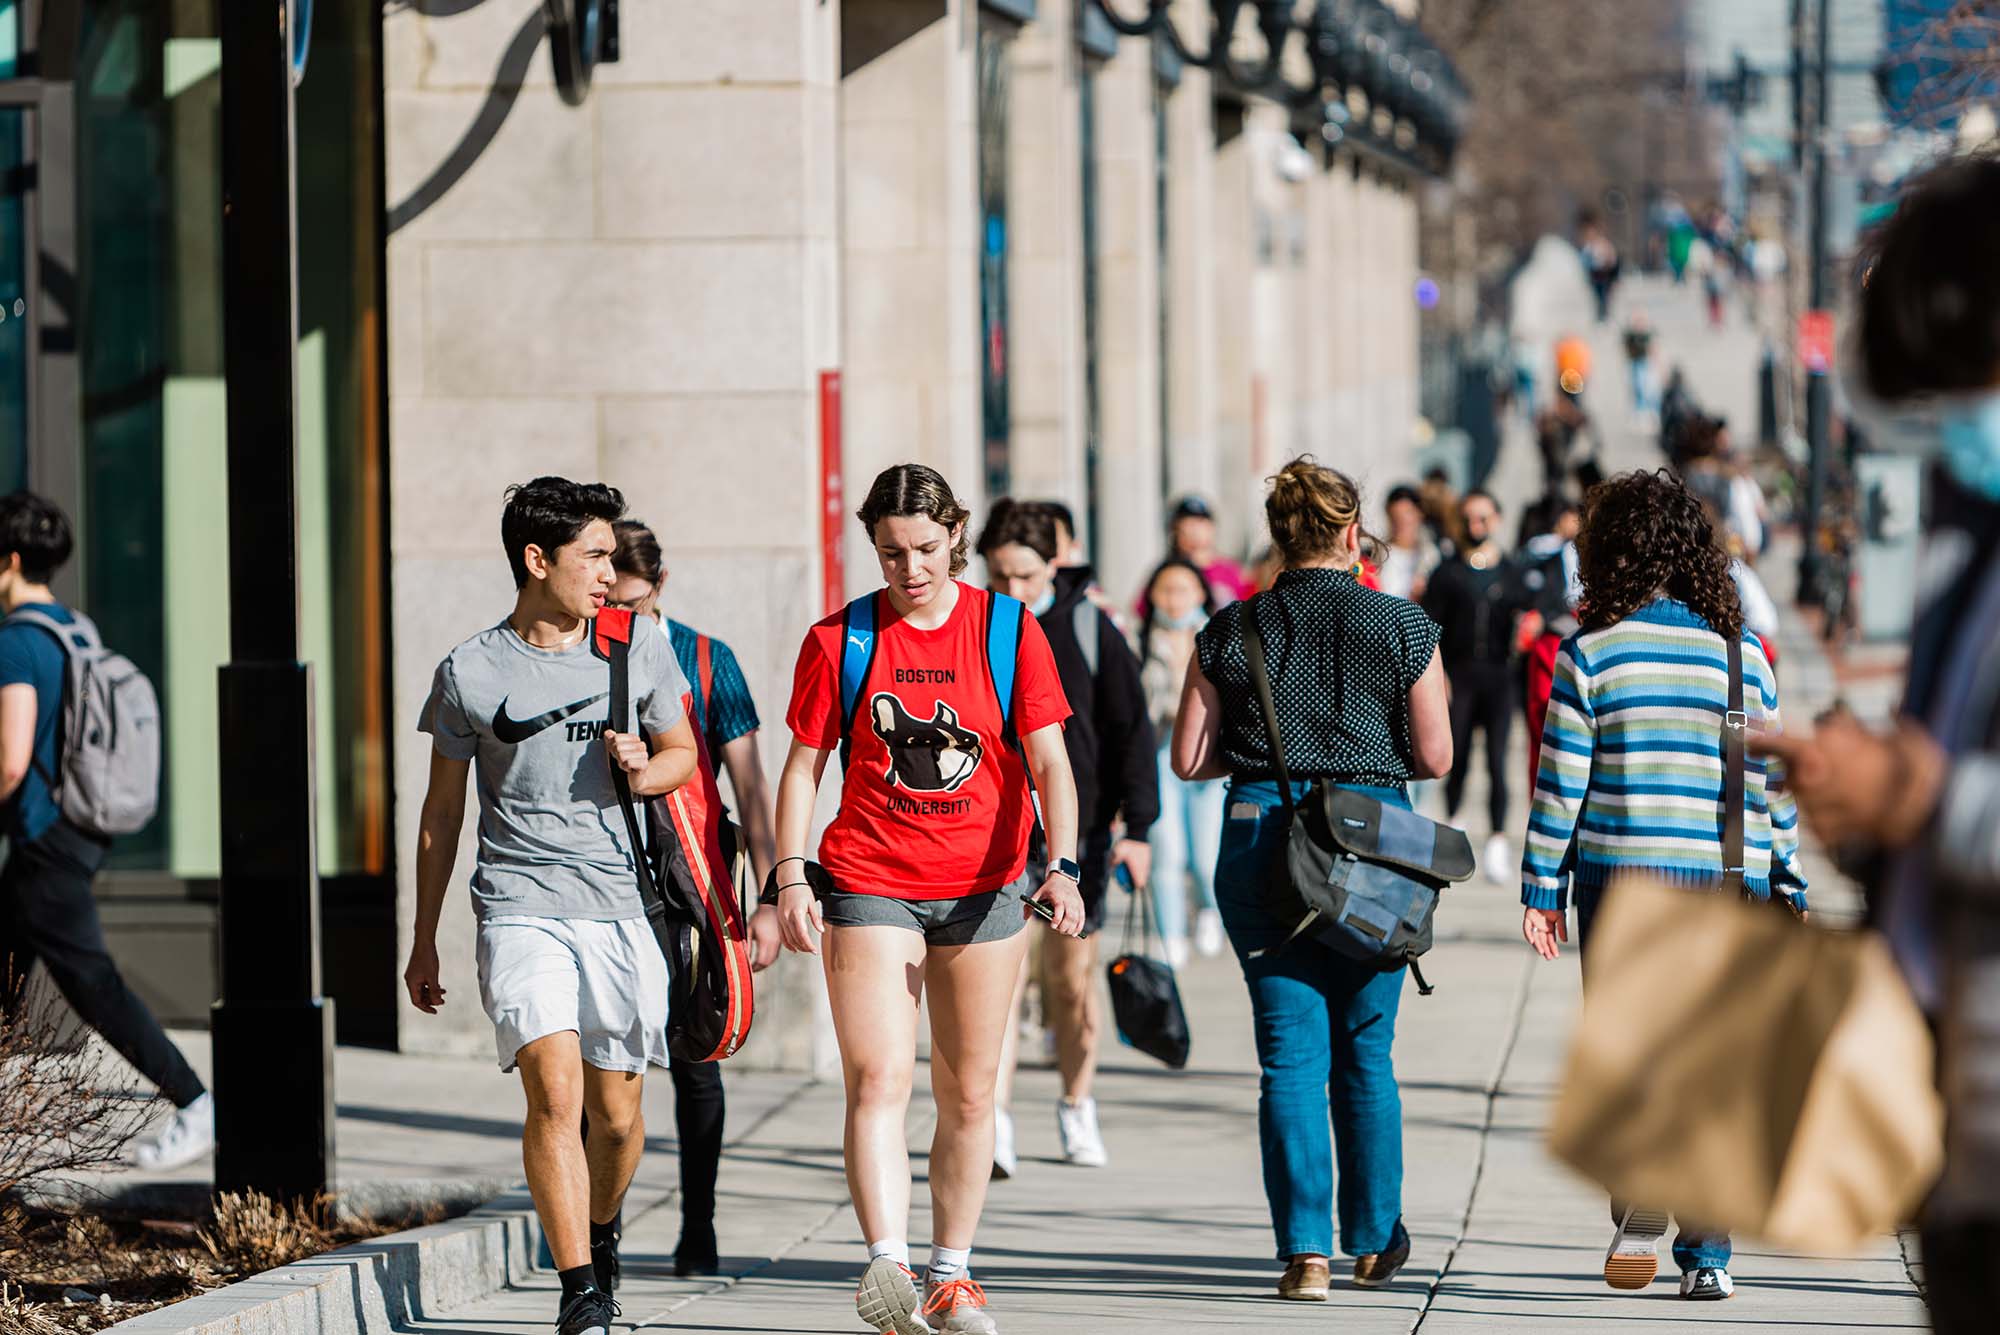 Photo of students walking down the CFA side of Comm Ave on a sunny warm day. Two students are in focus at the front left, one wears a gray nike tennis shirt, the other a red Boston University shirt.